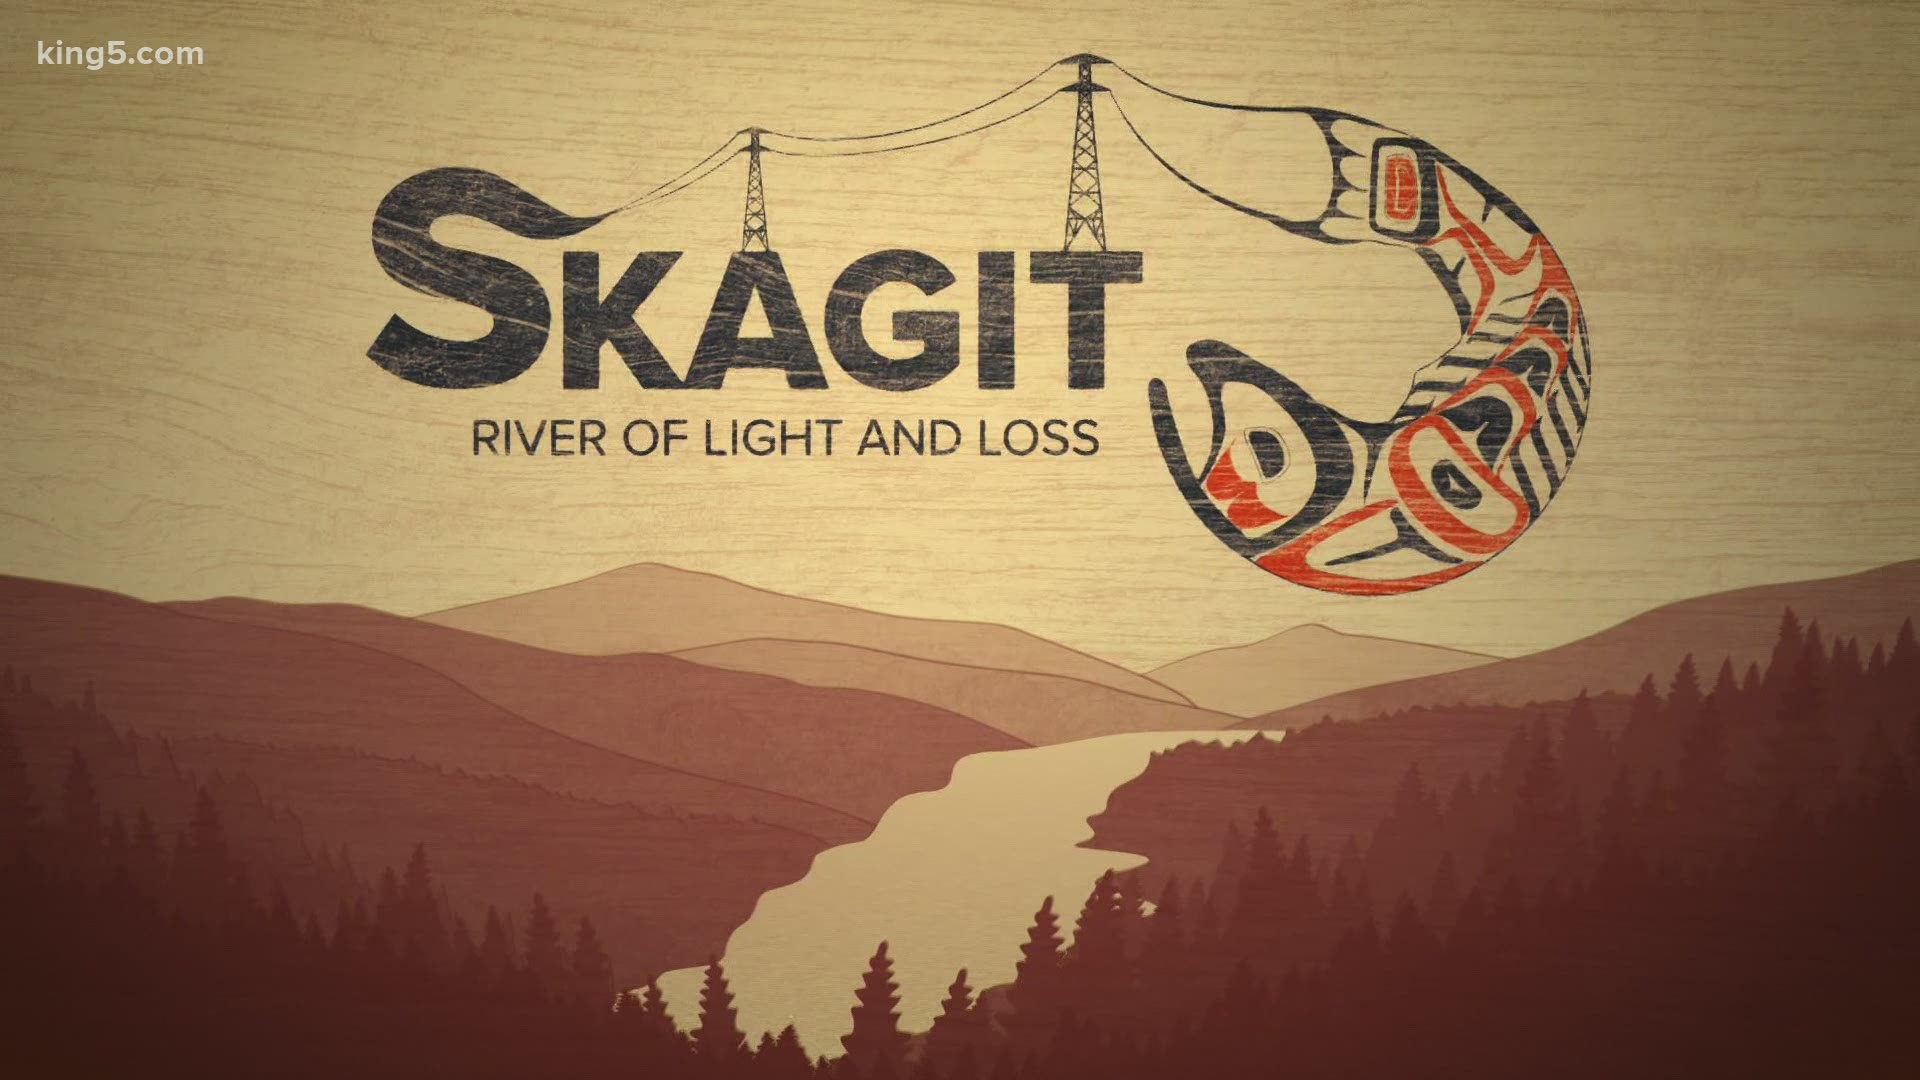 Seattle City Light executives announced their latest plans in an effort to get their Skagit River dams relicensed for up to 50 years.